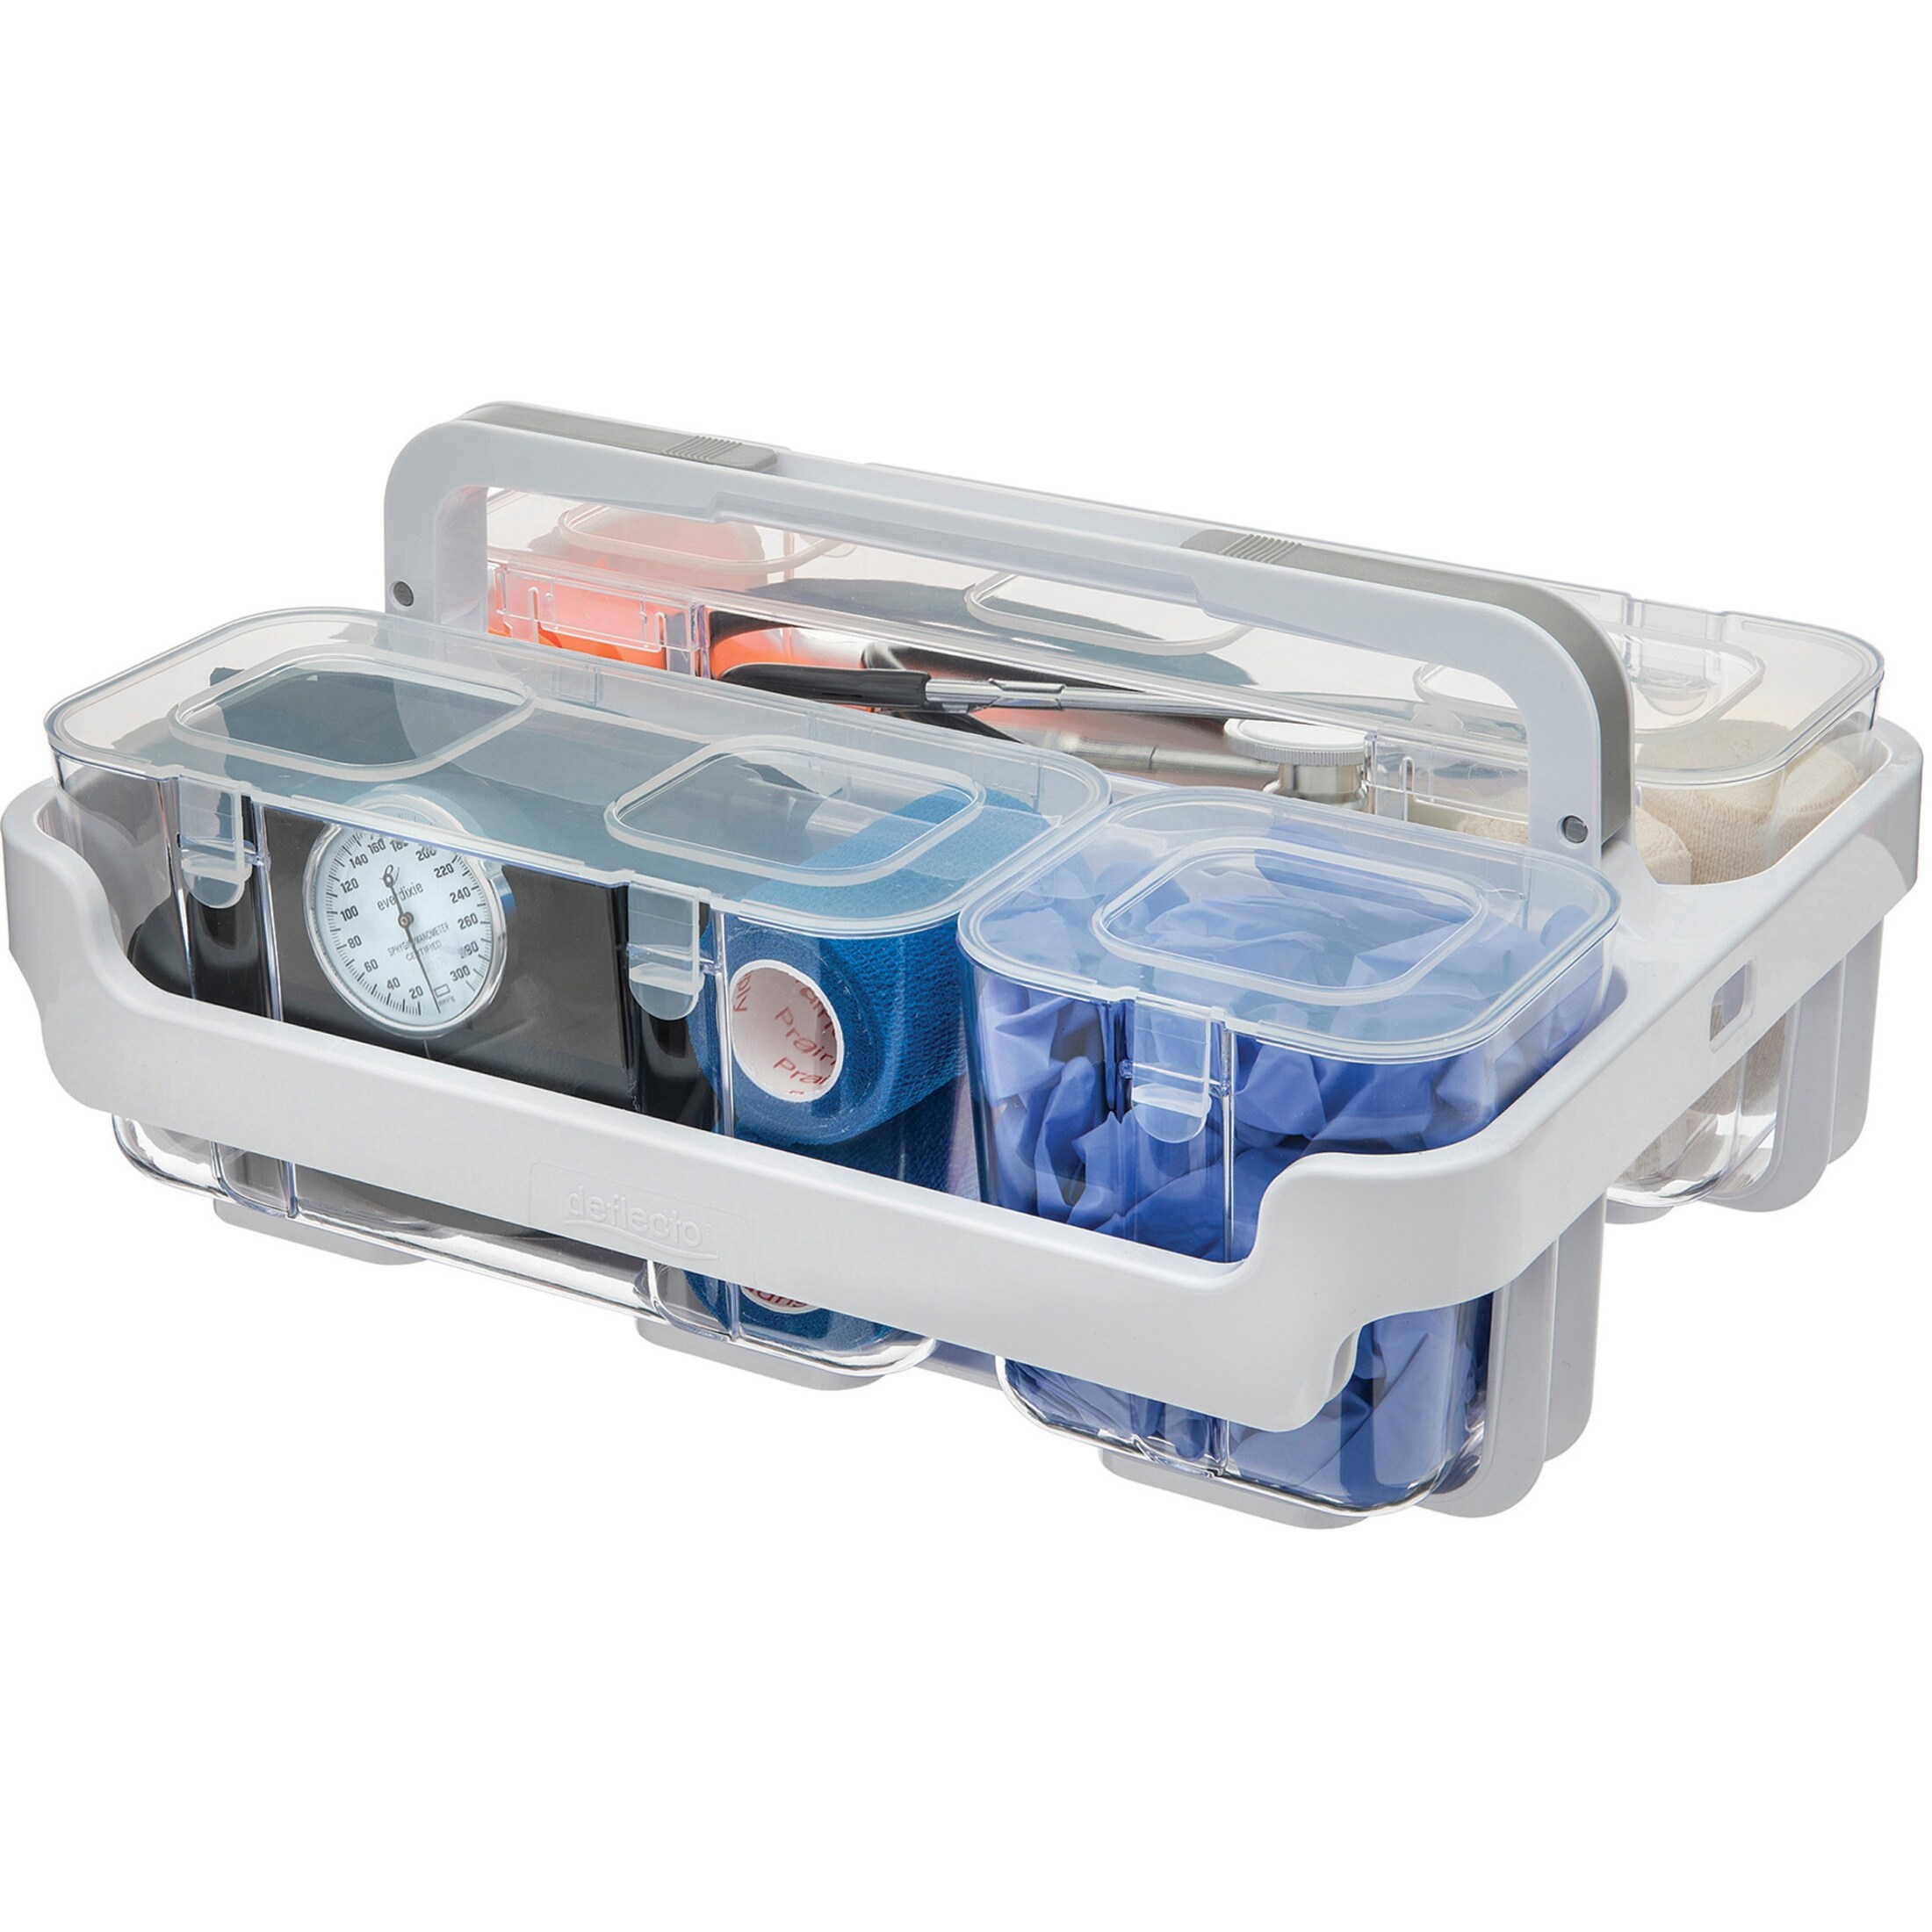 https://ak1.ostkcdn.com/images/products/is/images/direct/a07e38efb3f97a2447615cc038bc30e56490c992/Deflecto-Stackable-Caddy-Organizer.jpg